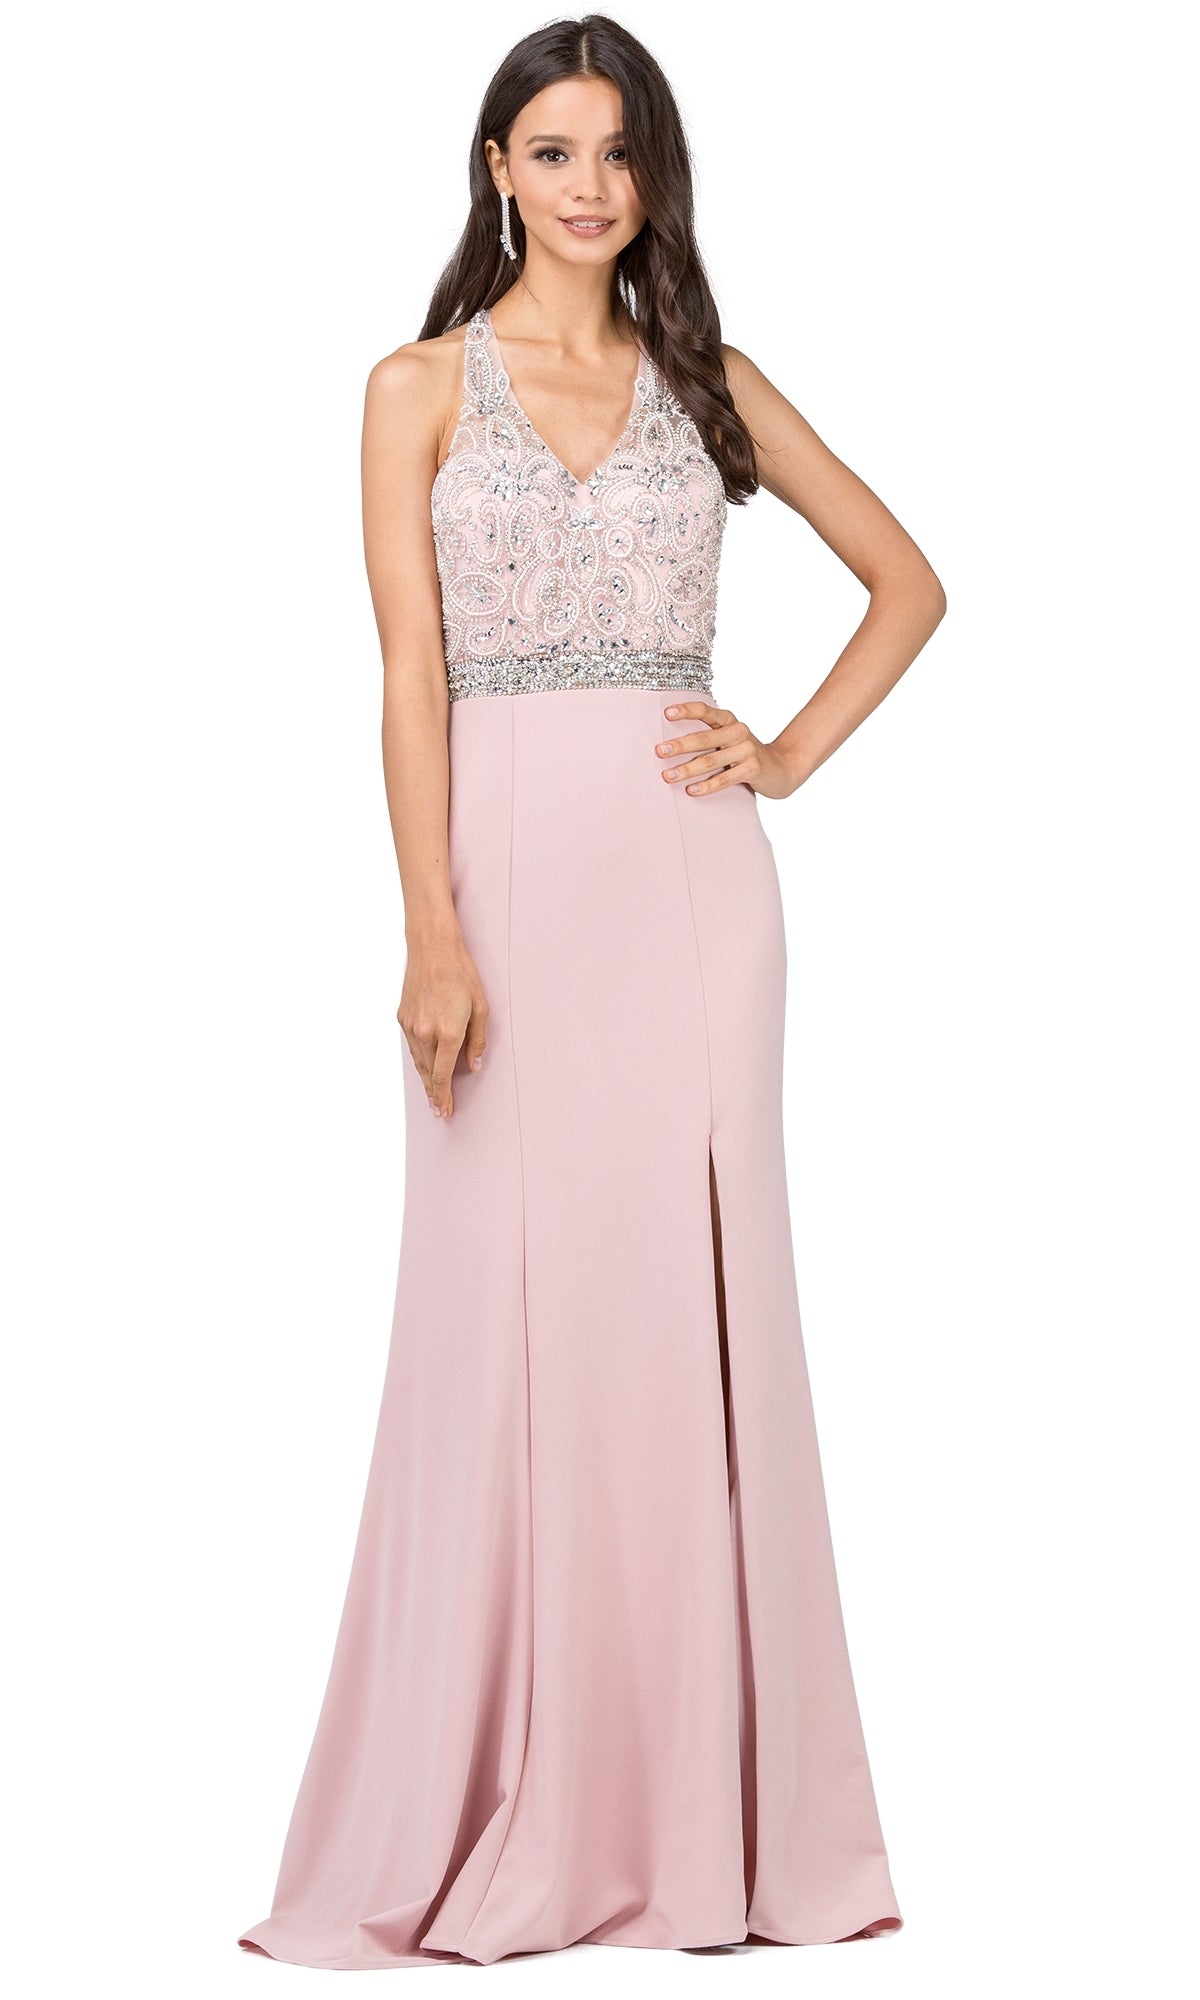 Sleeveless T-Back Formal Evening Dress with Beading